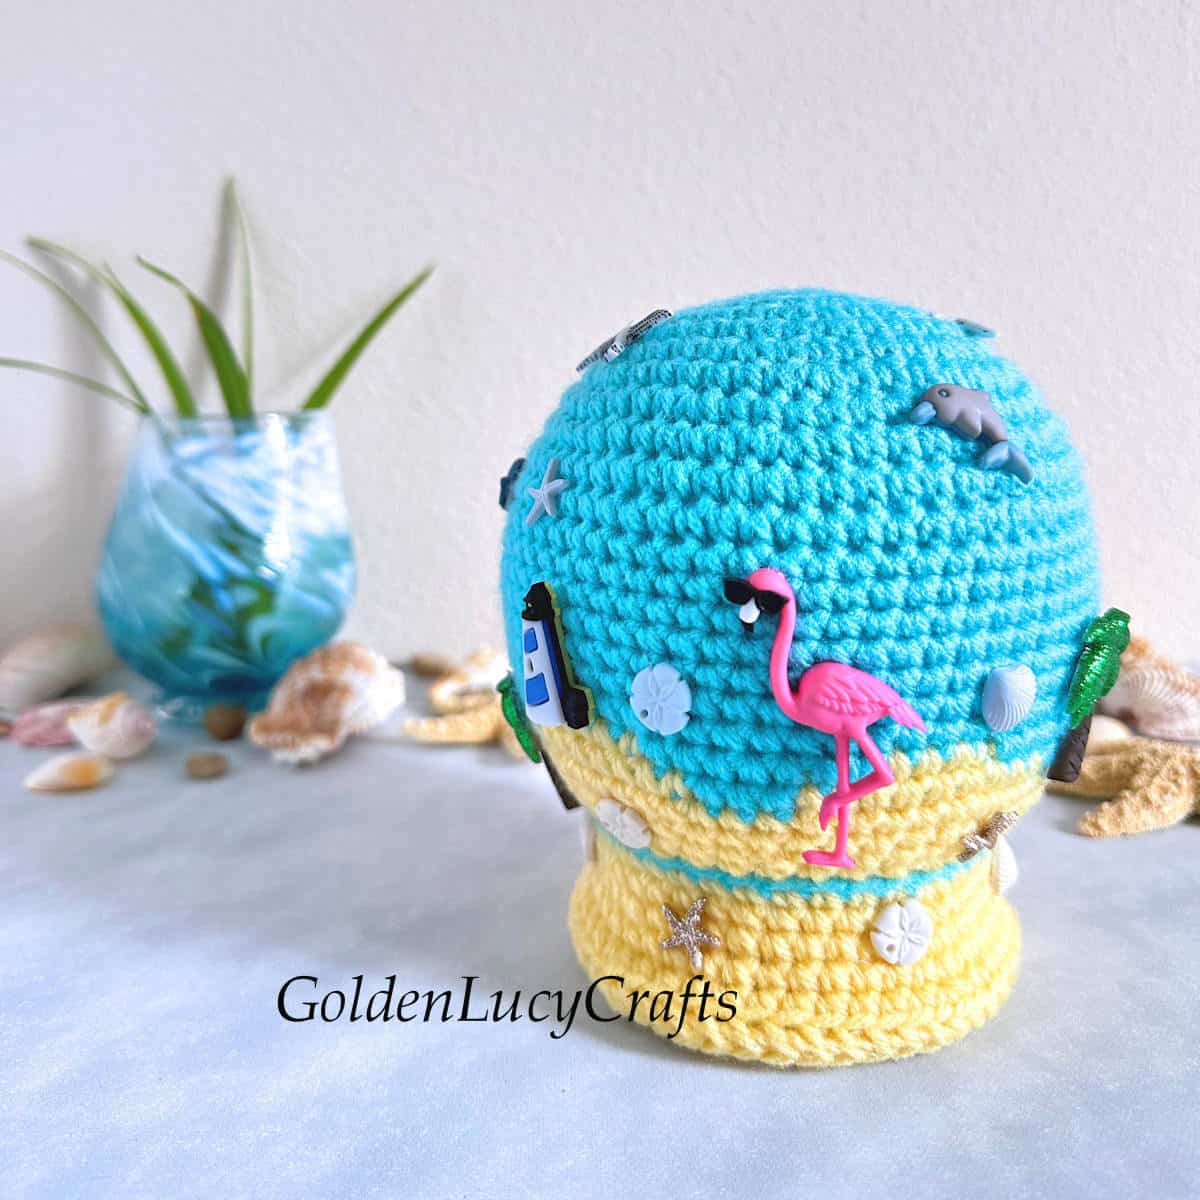 Crocheted summer beach snow globe toy embellished with craft buttons.